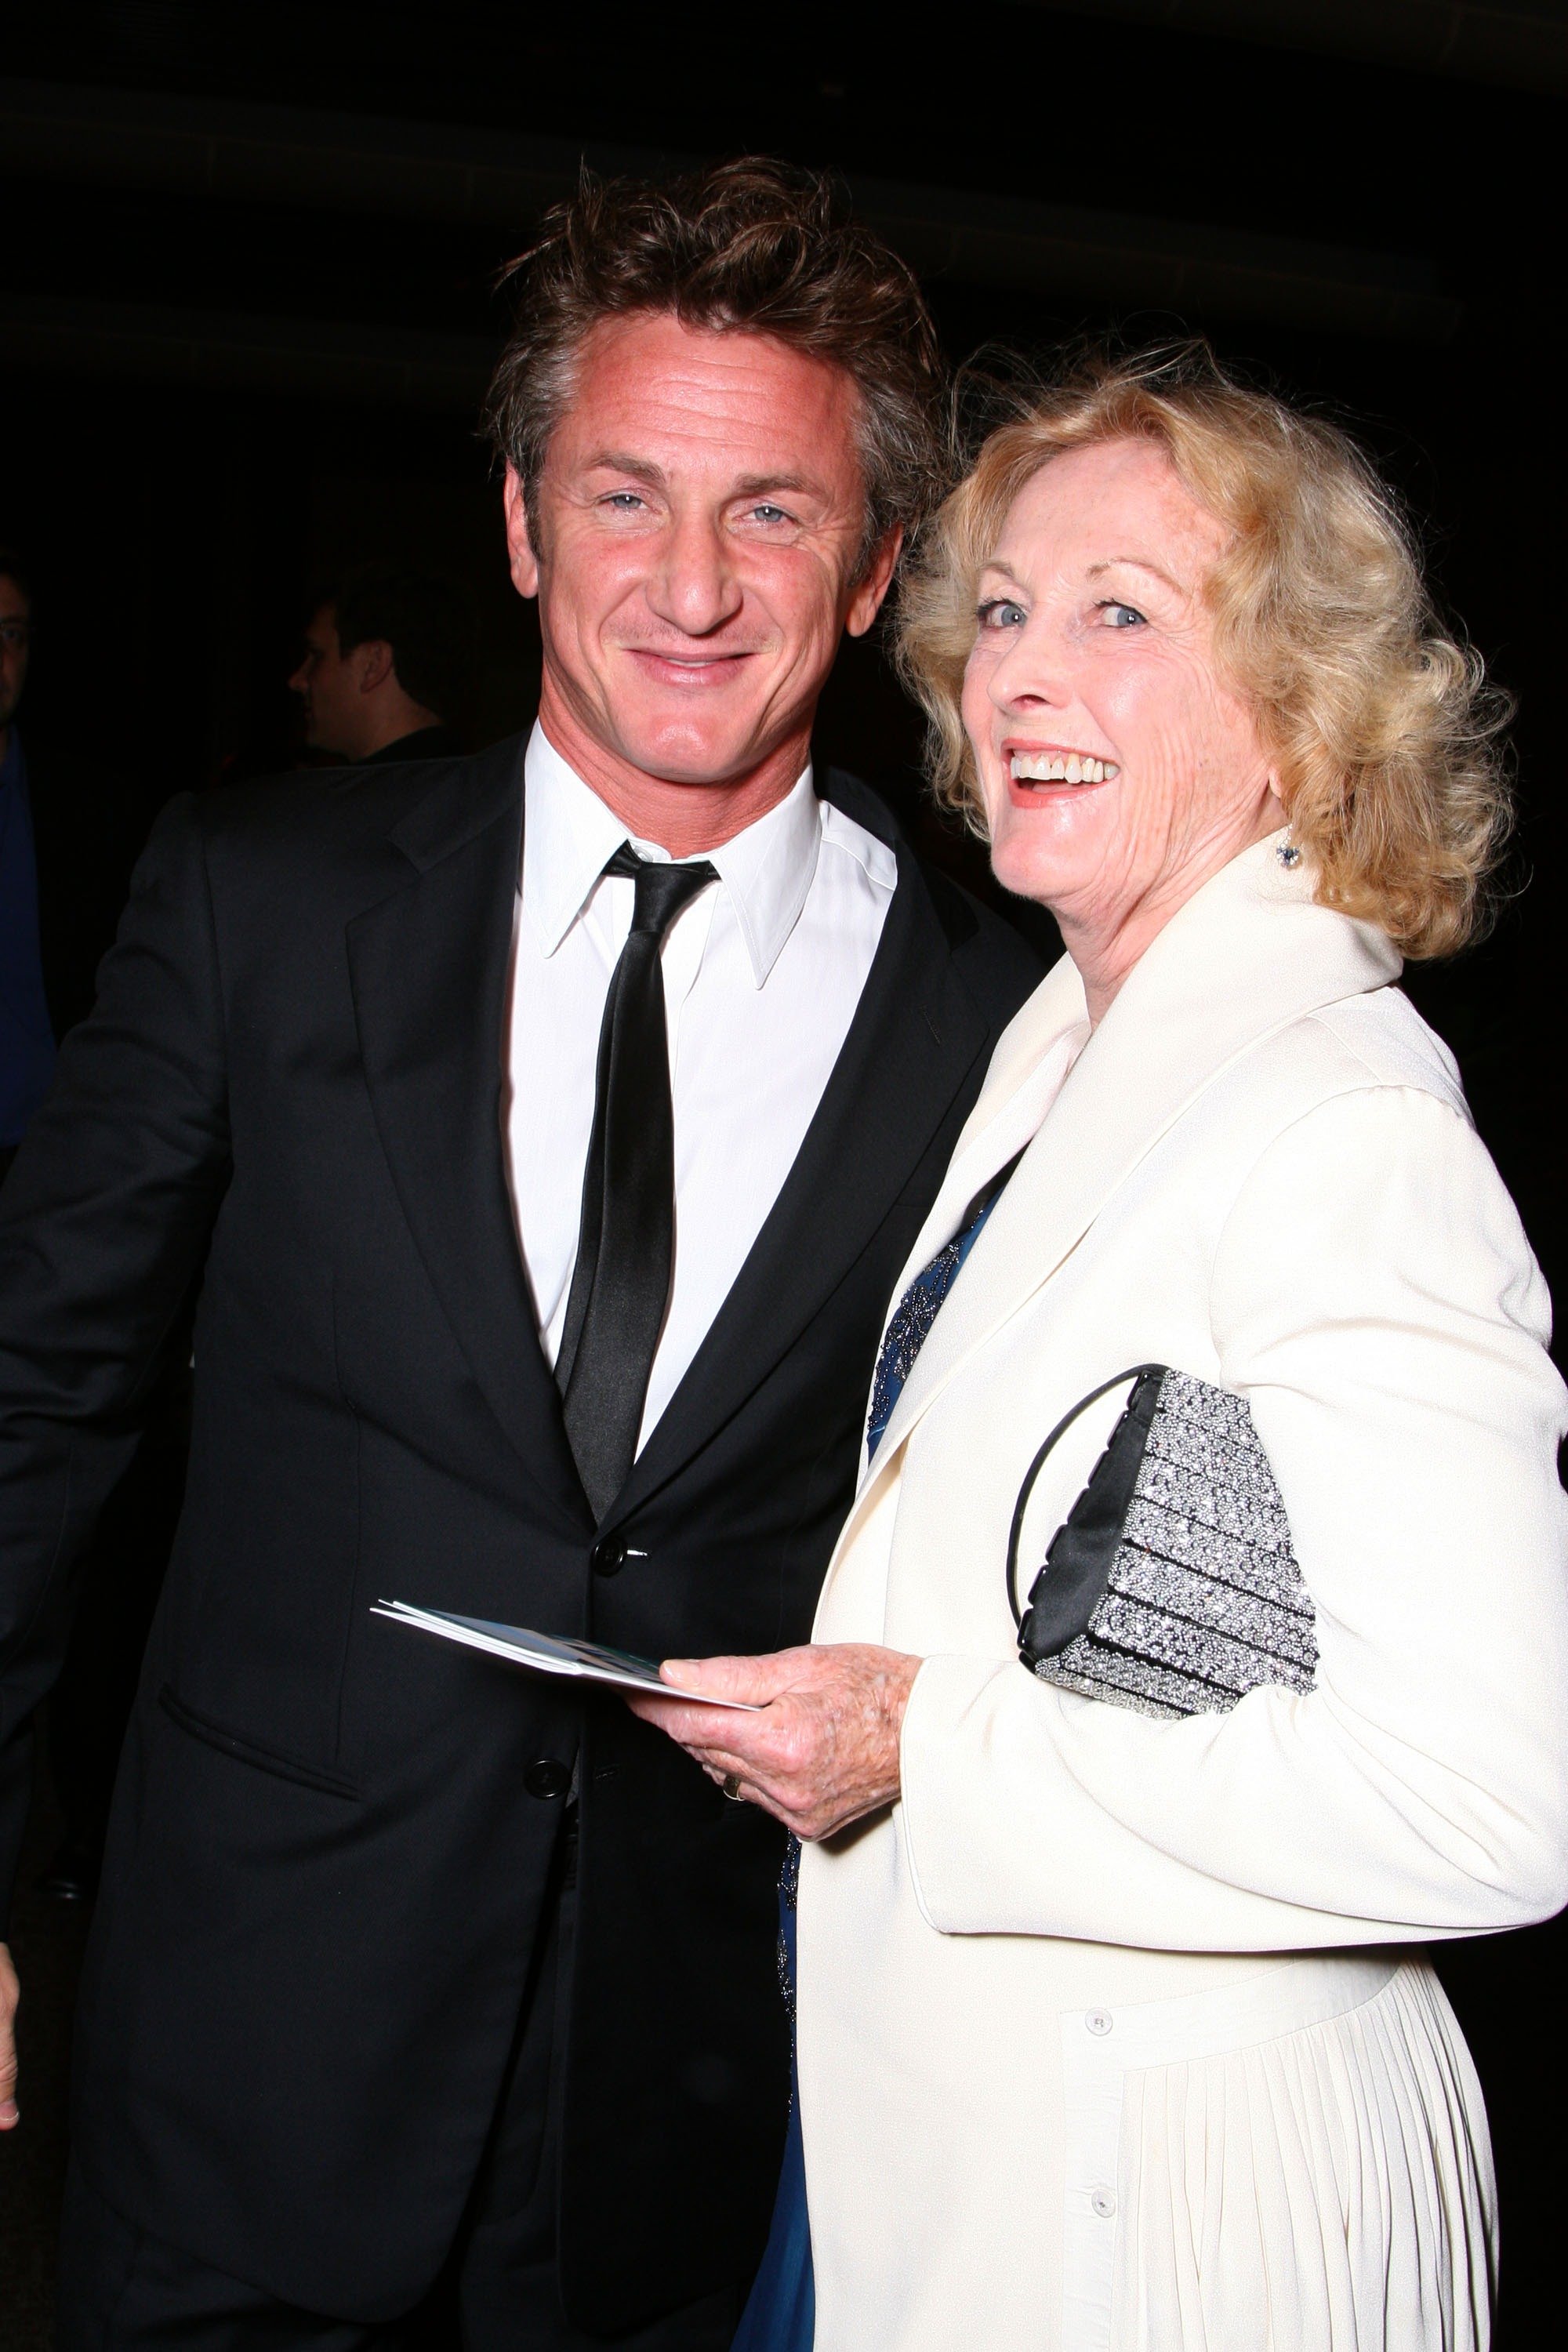 Sean Penn and his mother, Eileen Ryan, arrive at the Los Angeles premiere of Paramount Vantage's "Into the Wild" held at the Director's Guild of America on September 18, 2007, in Los Angeles, California. | Source: Getty Images